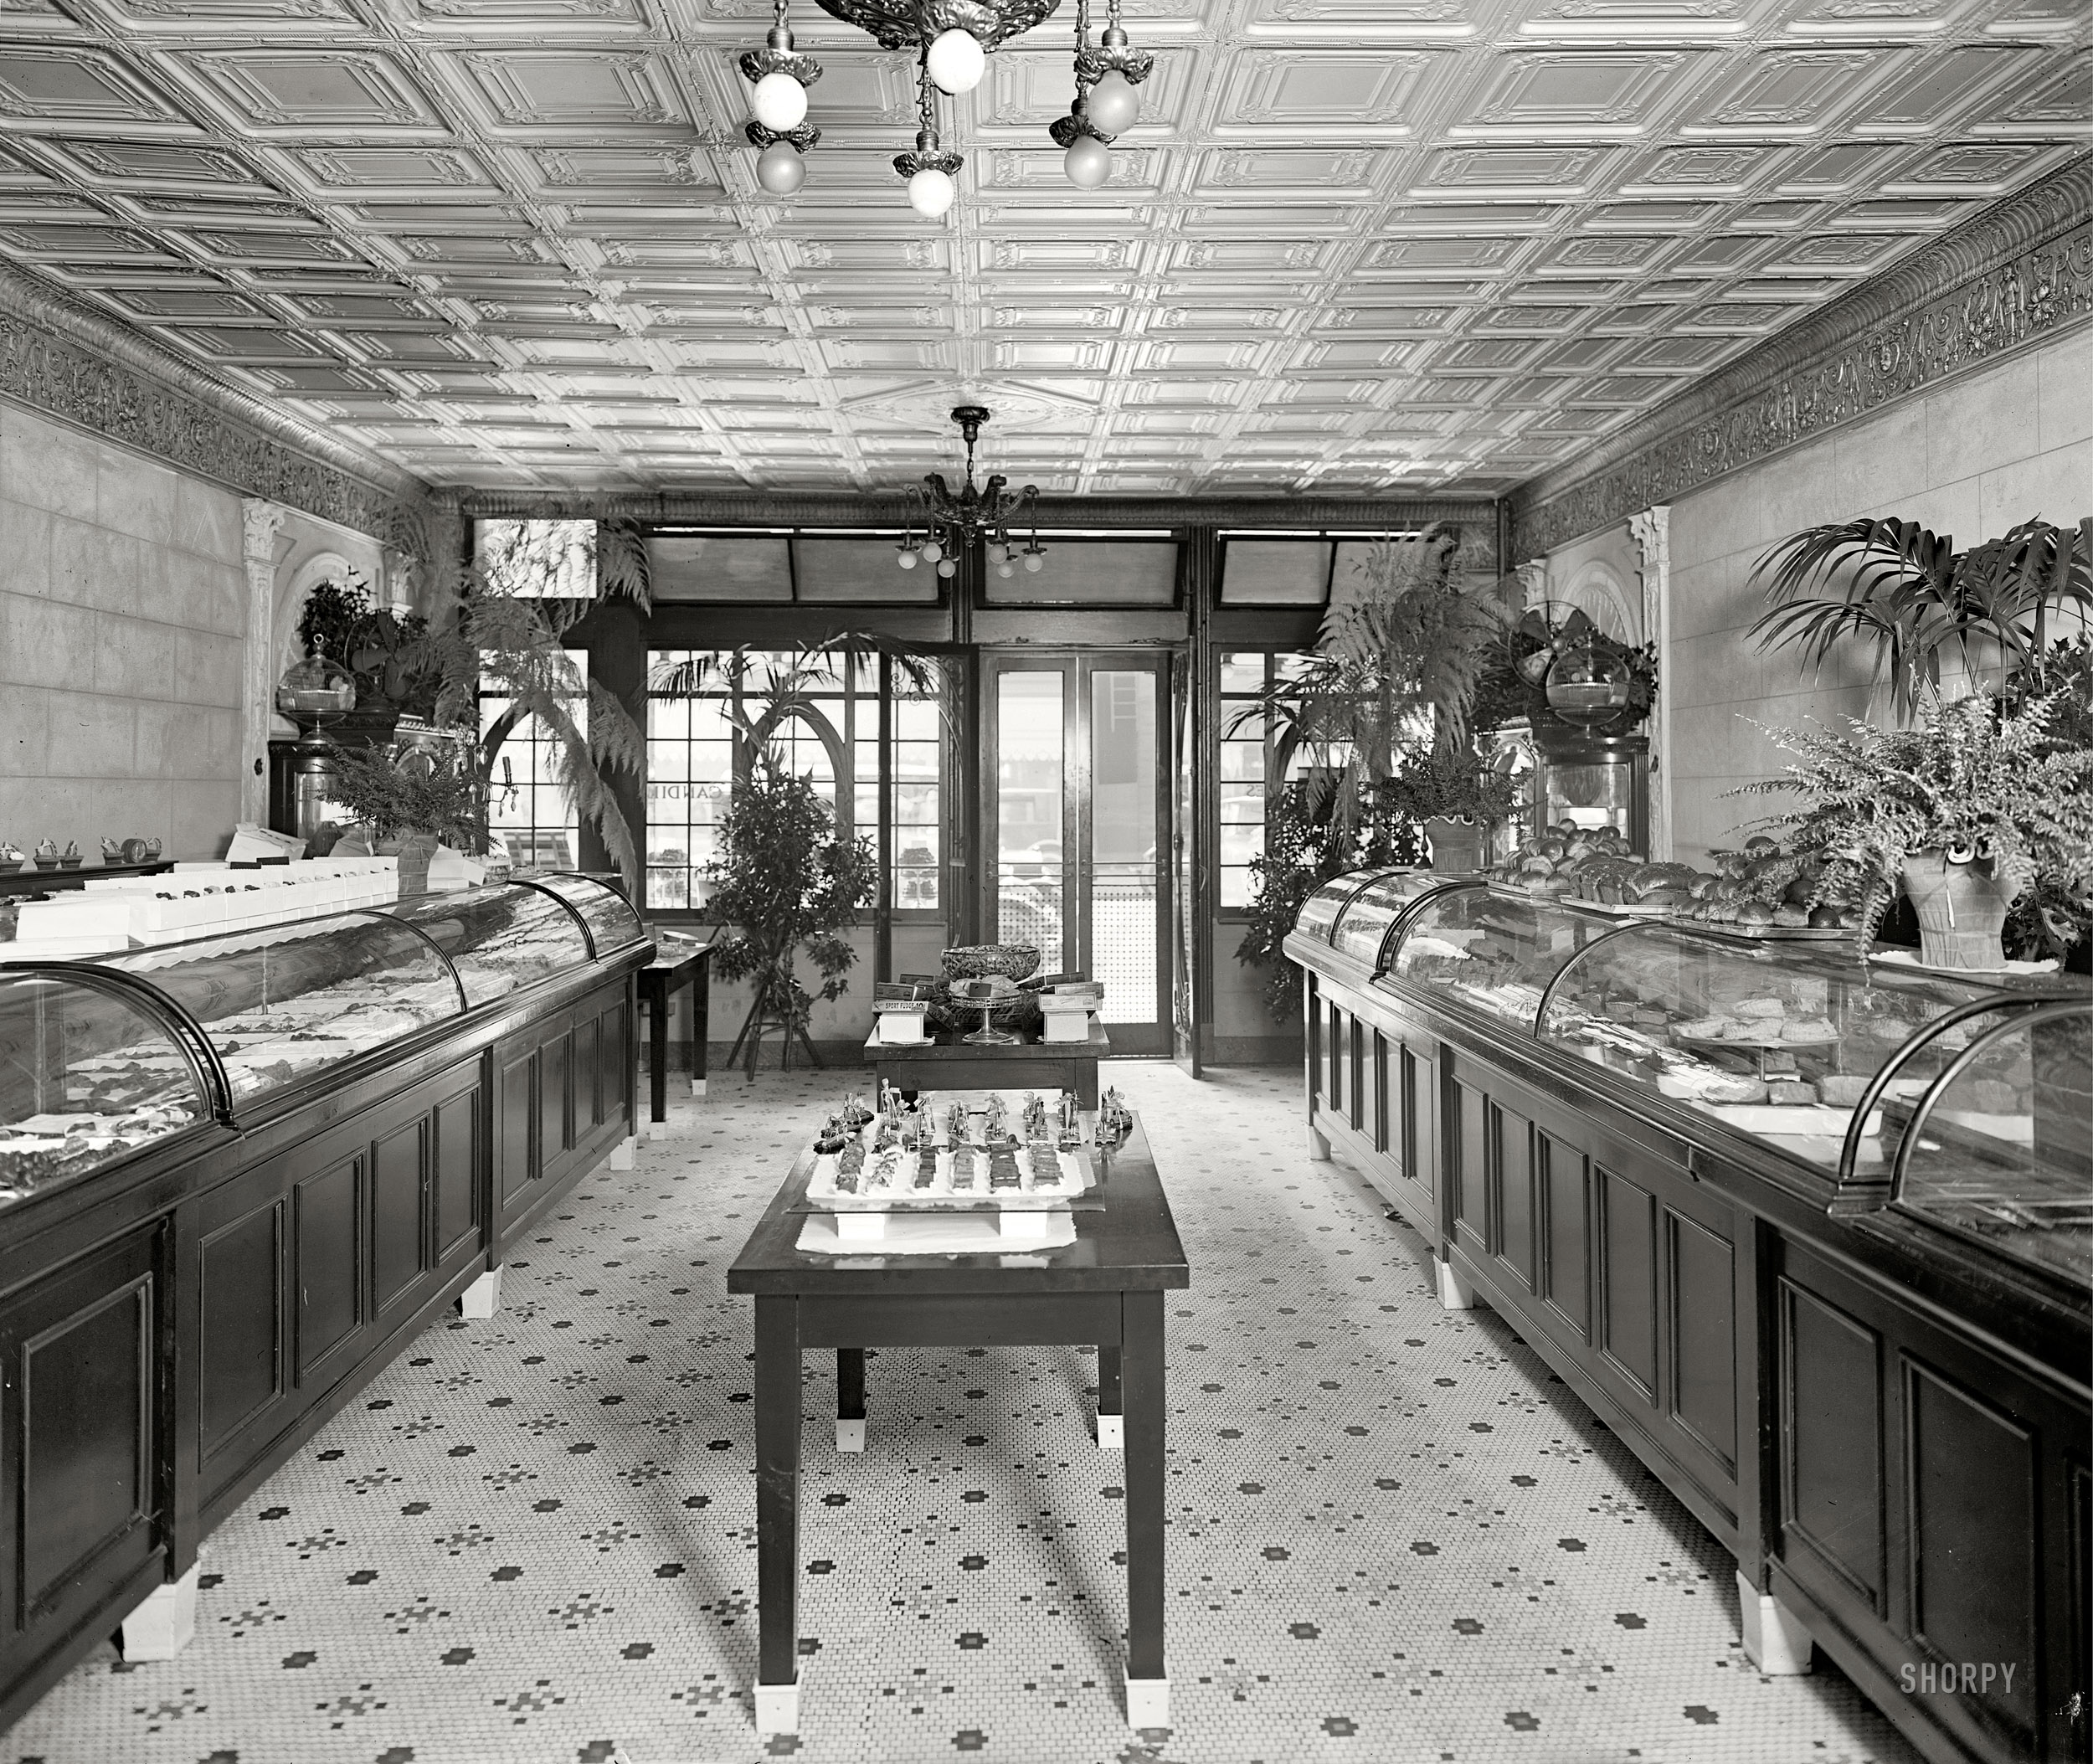 Washington, D.C., circa 1924. "Brownley interior." Our second peek inside the Brownley Confectionery on G Street. On the table: more "Sport Fudge."  National Photo Company Collection glass negative. View full size.